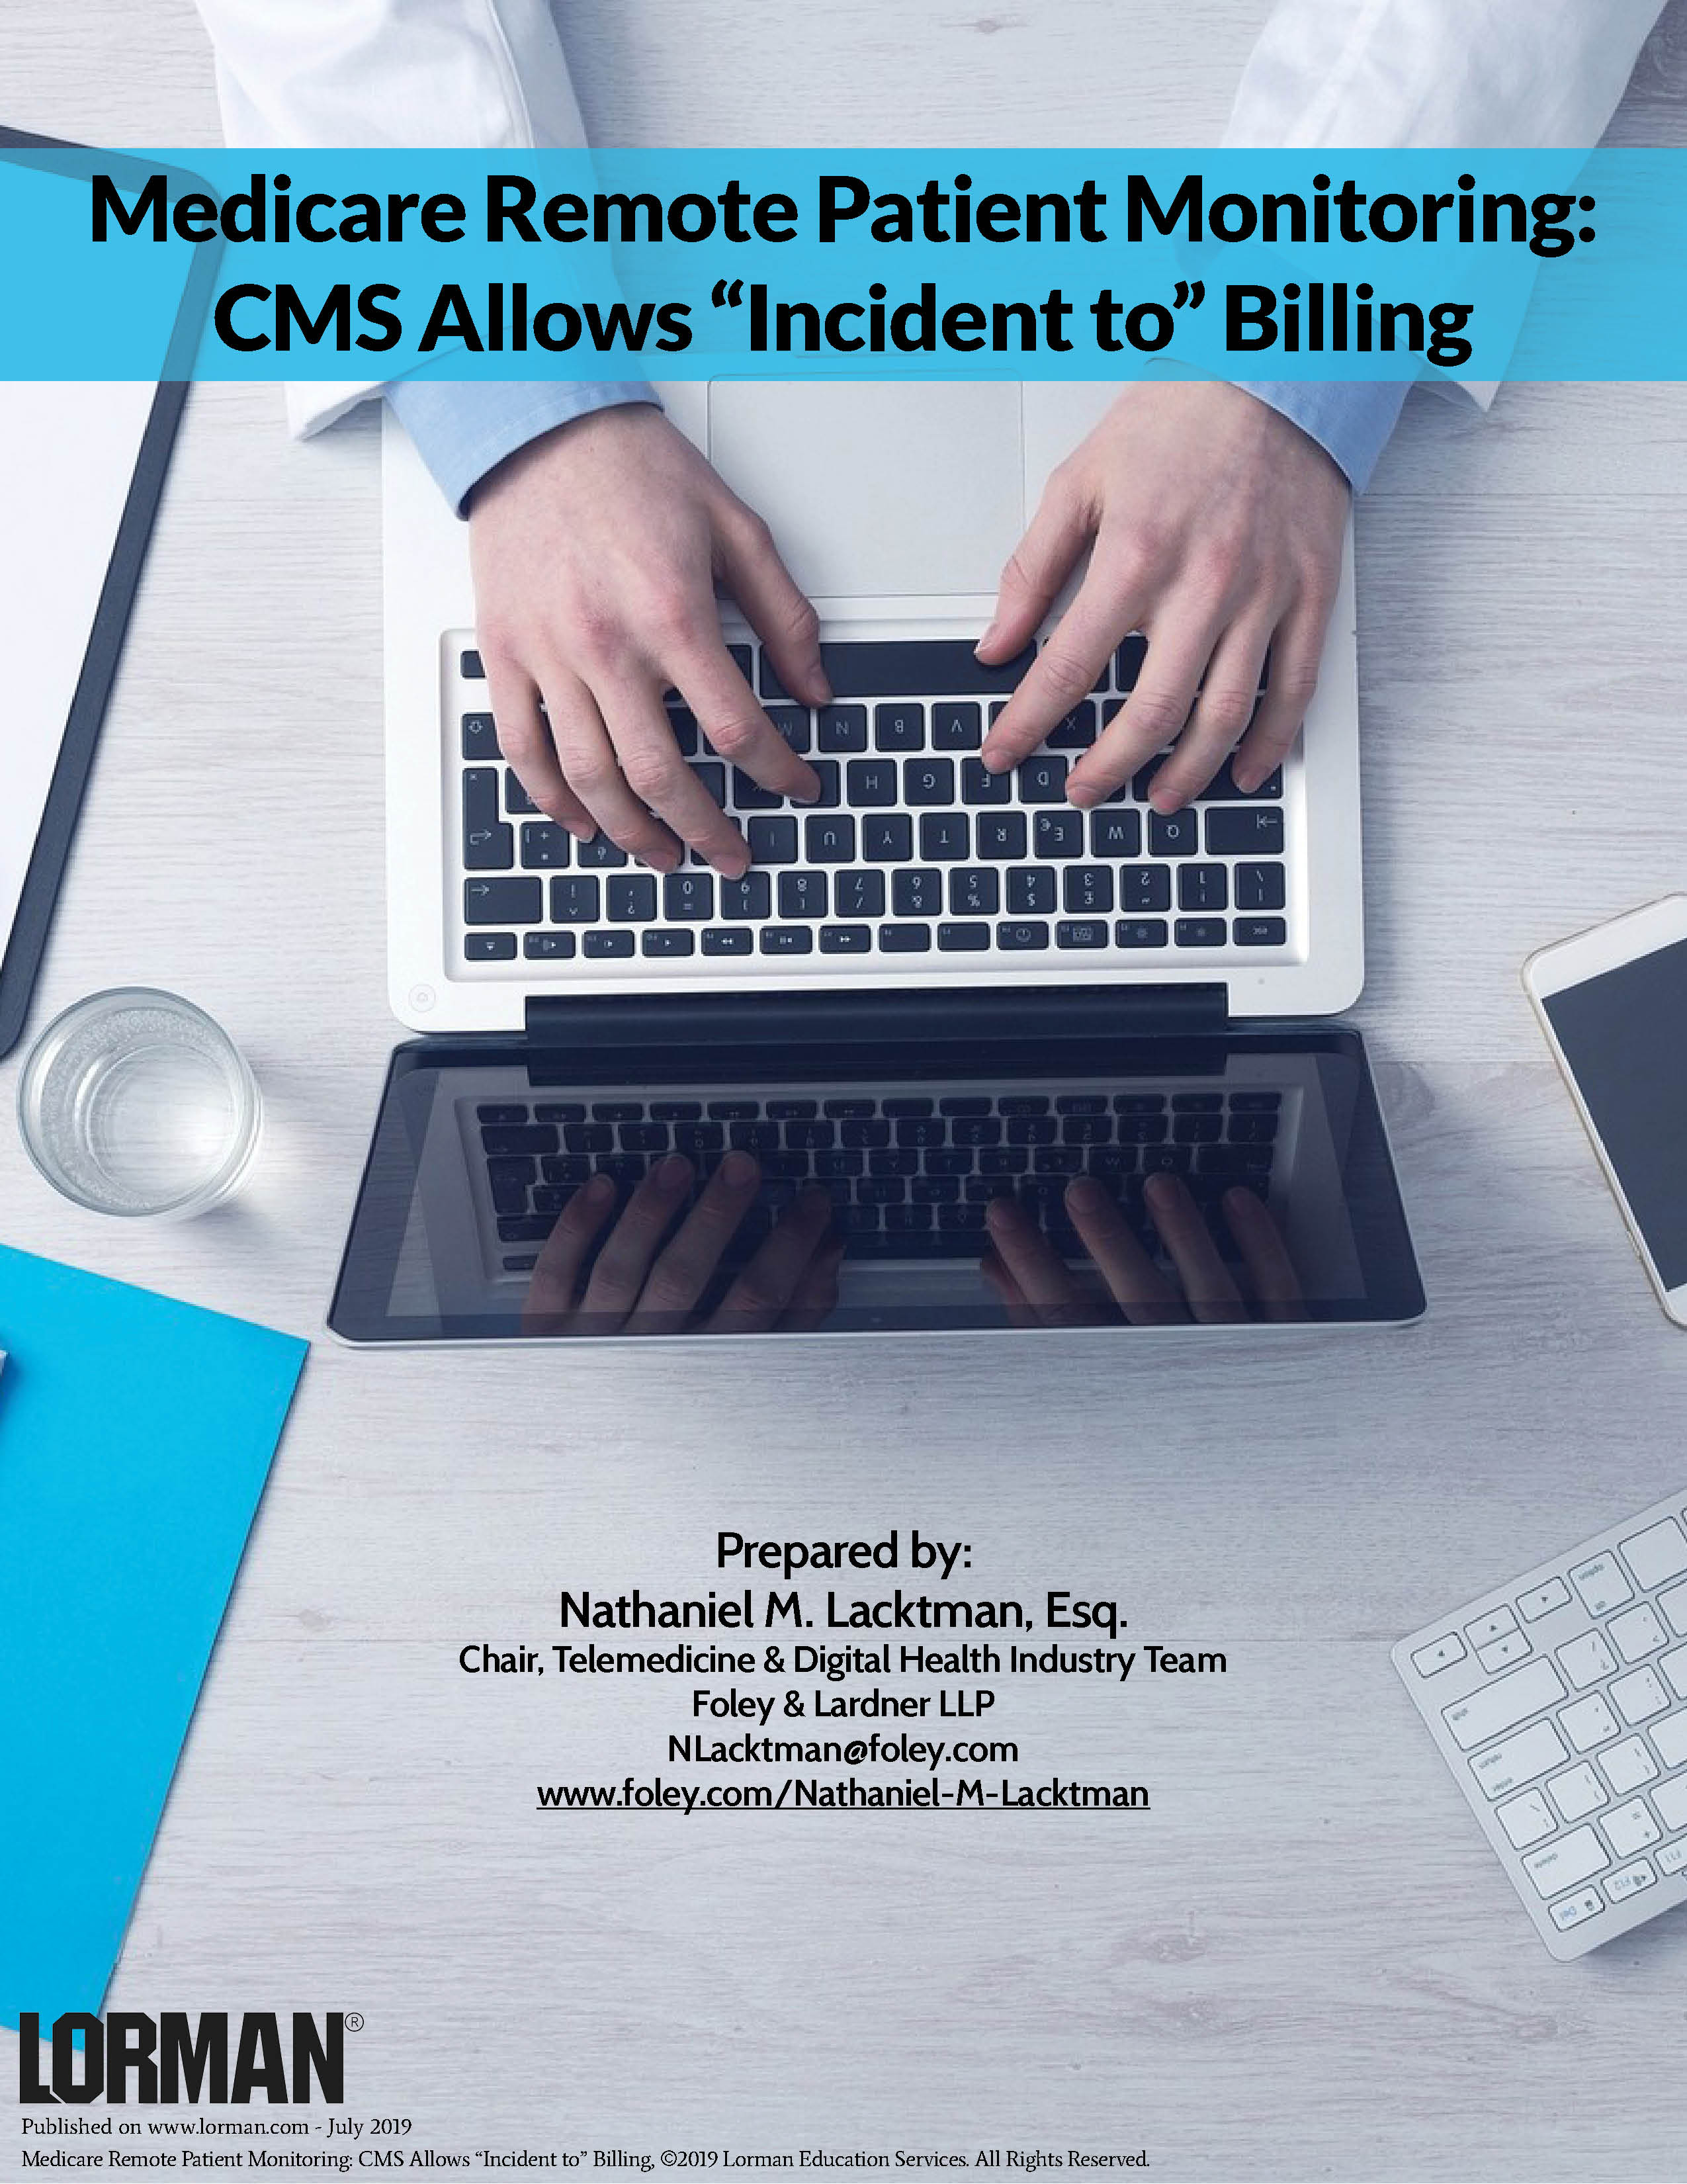 Medicare Remote Patient Monitoring: CMS Allows “Incident to” Billing